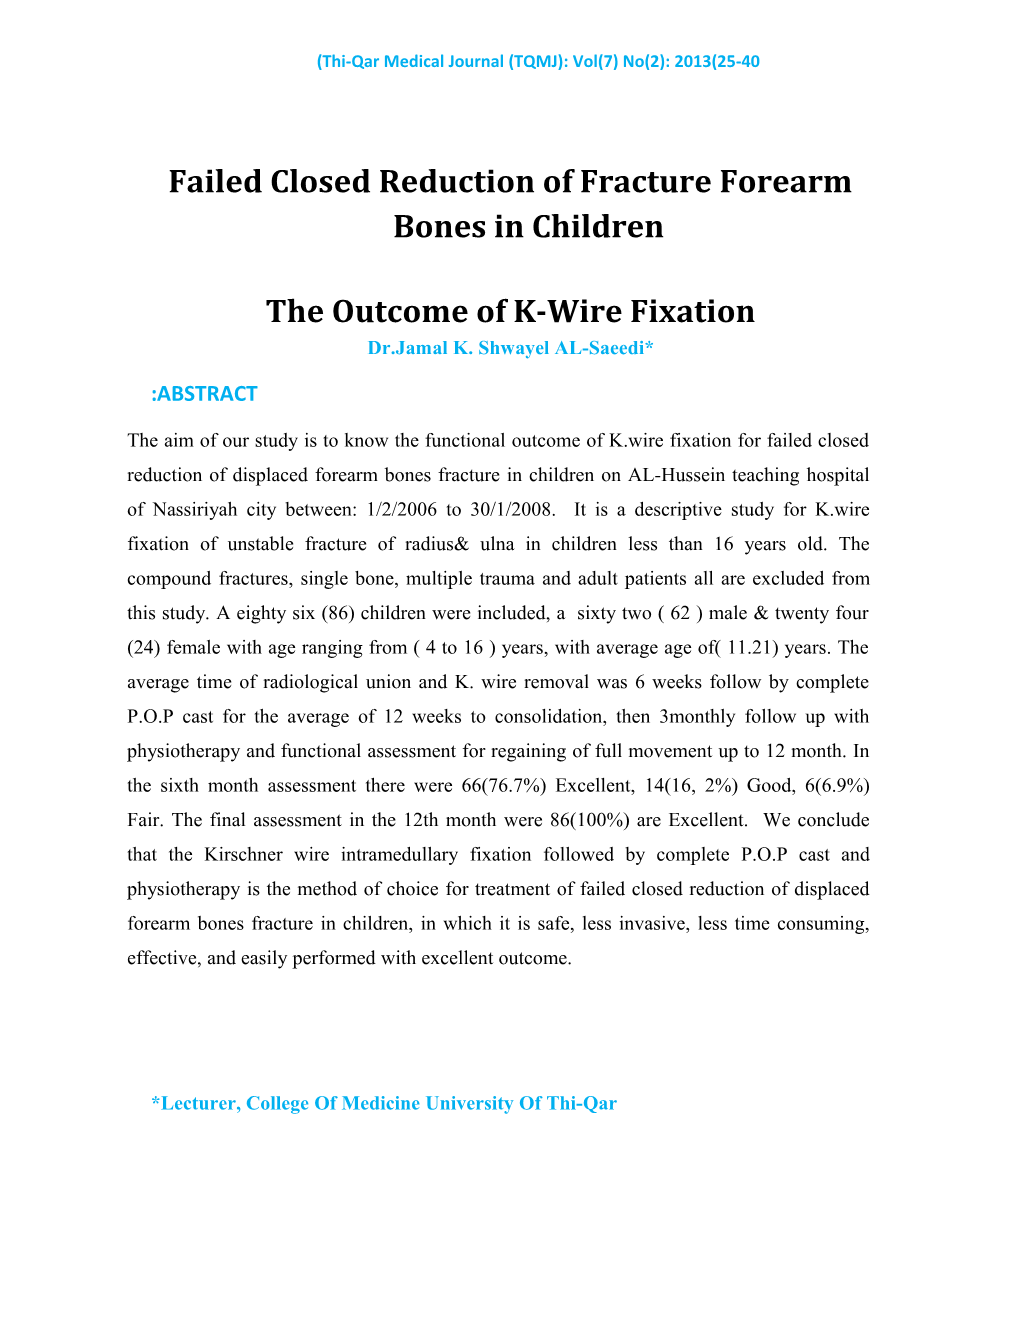 Failed Closed Reduction of Fracture Forearm Bones in Children